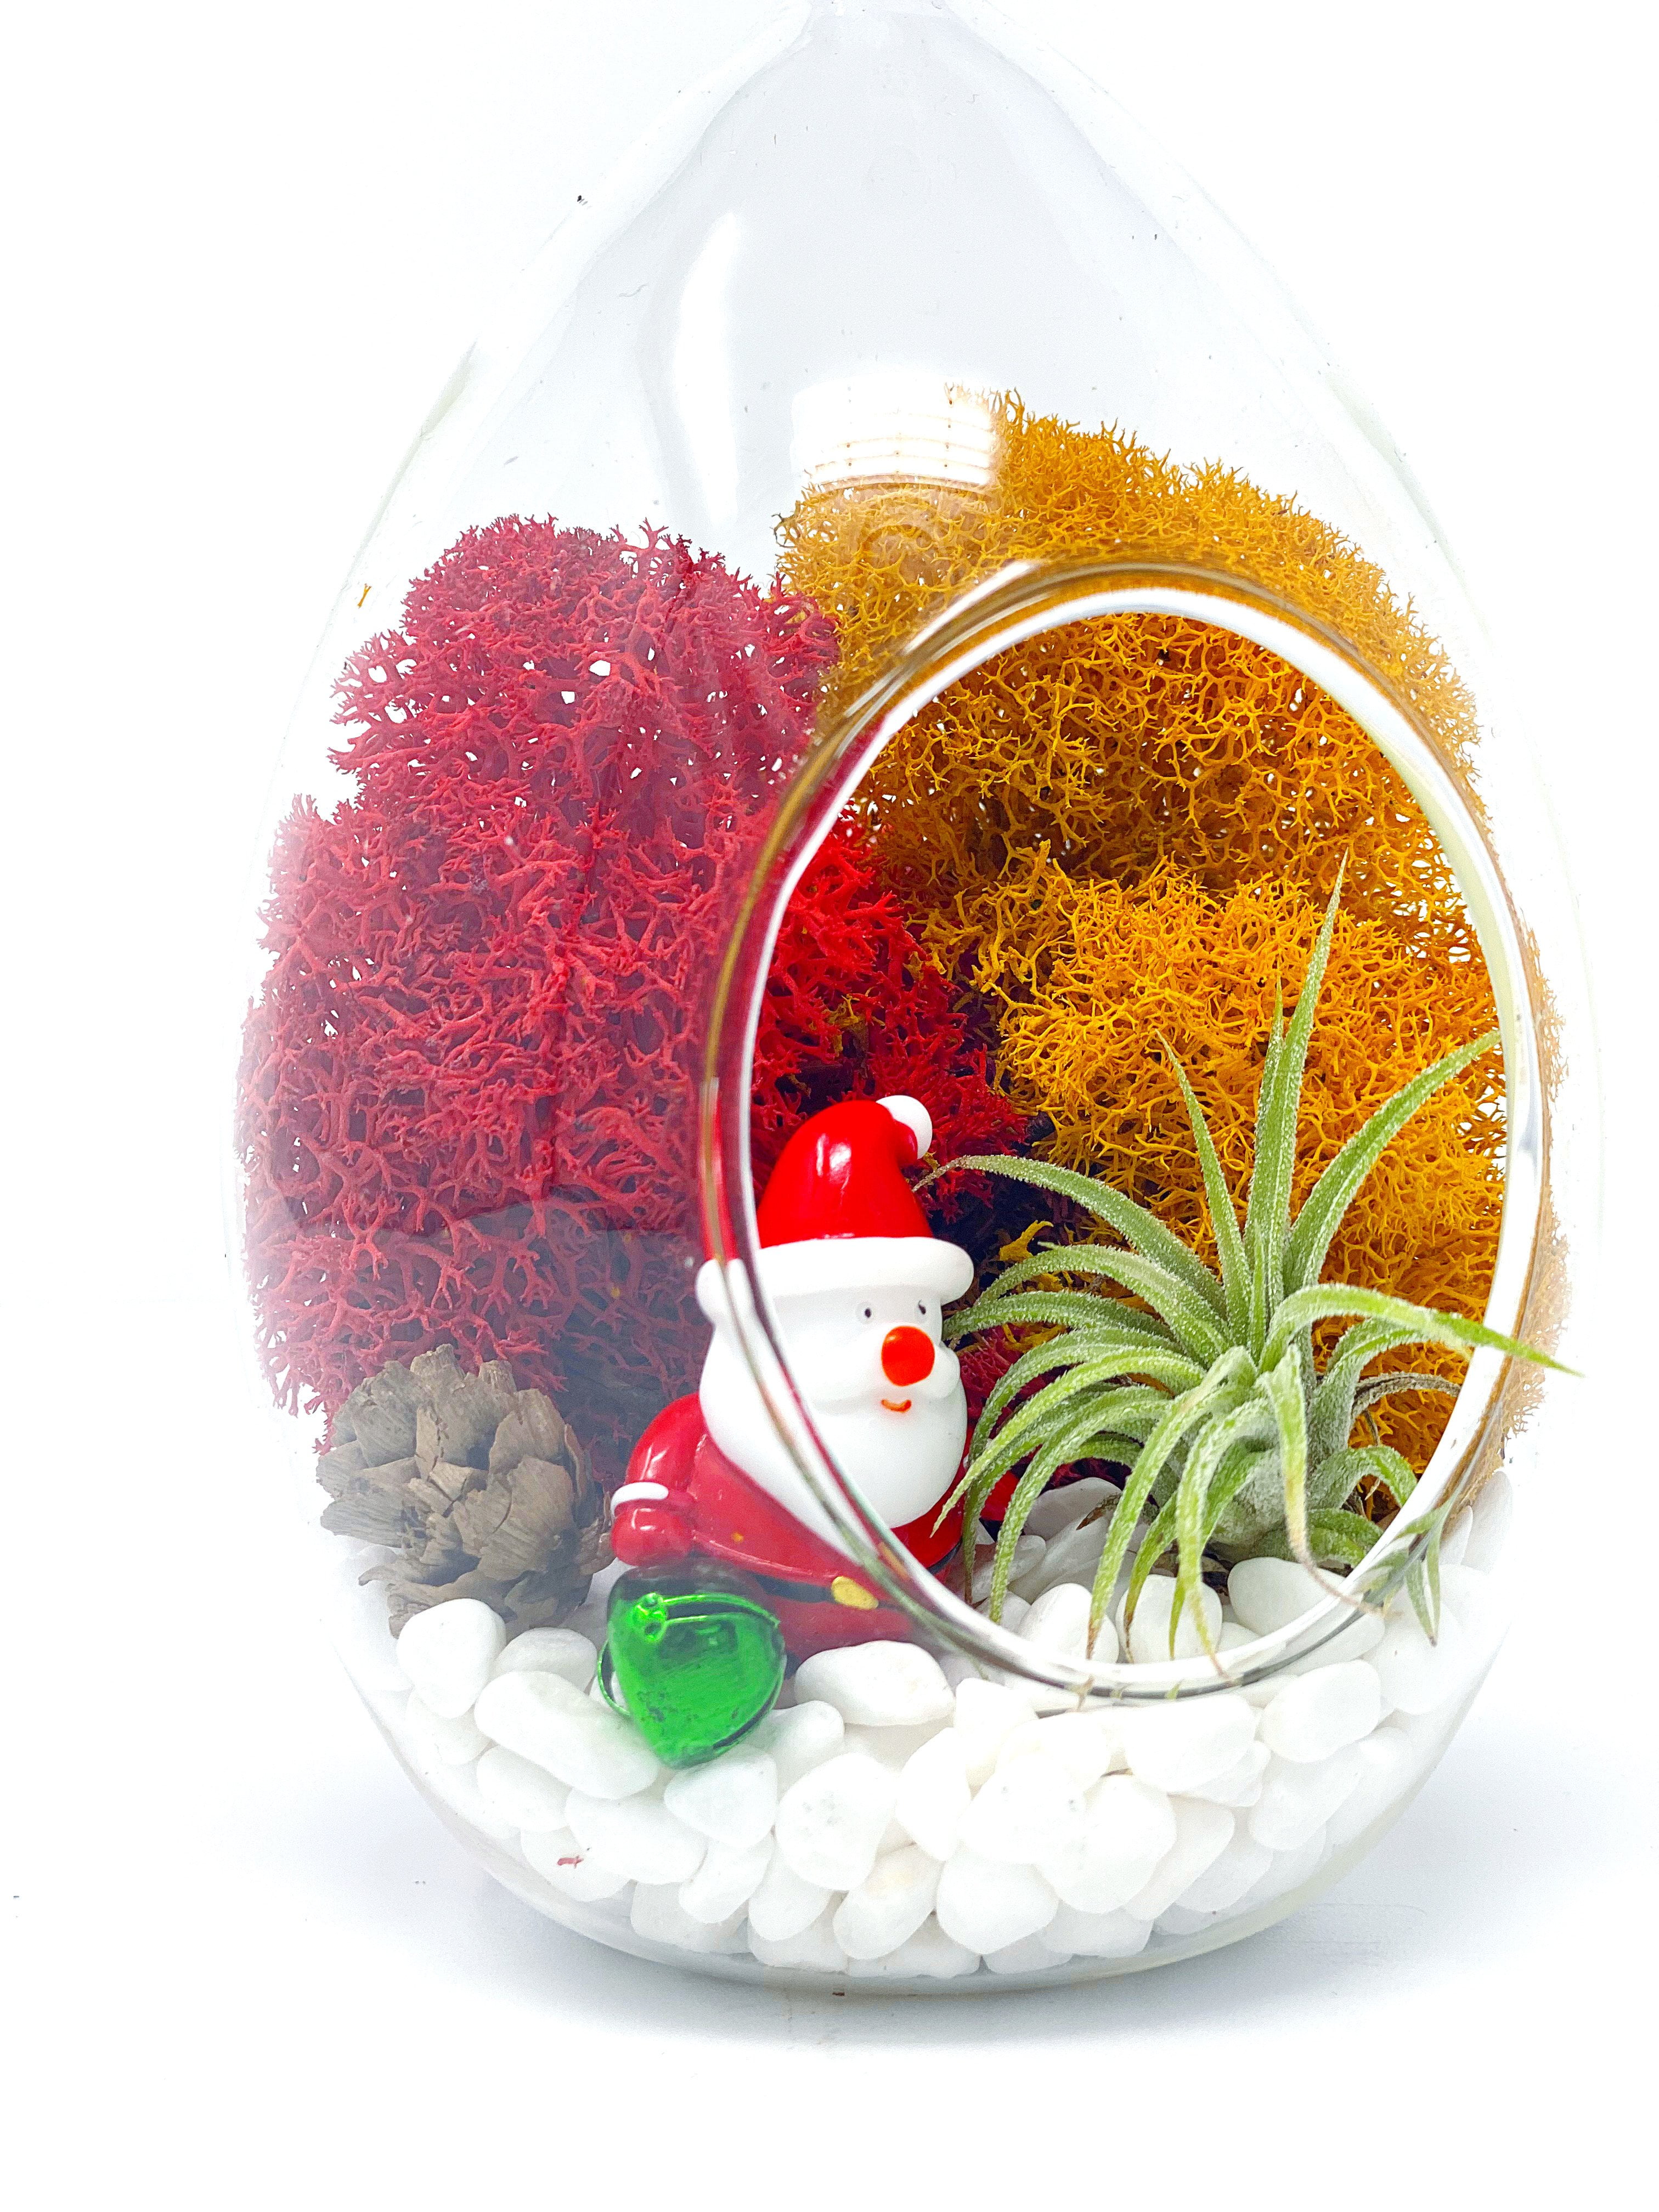  4.5 Inch Glass Air Plant Terrarium Kit with Color Changing LED  Light Display, Live Tillandsia Air Plant, White Sand, Seashell and Colored  Reindeer Moss (Green) : Patio, Lawn & Garden